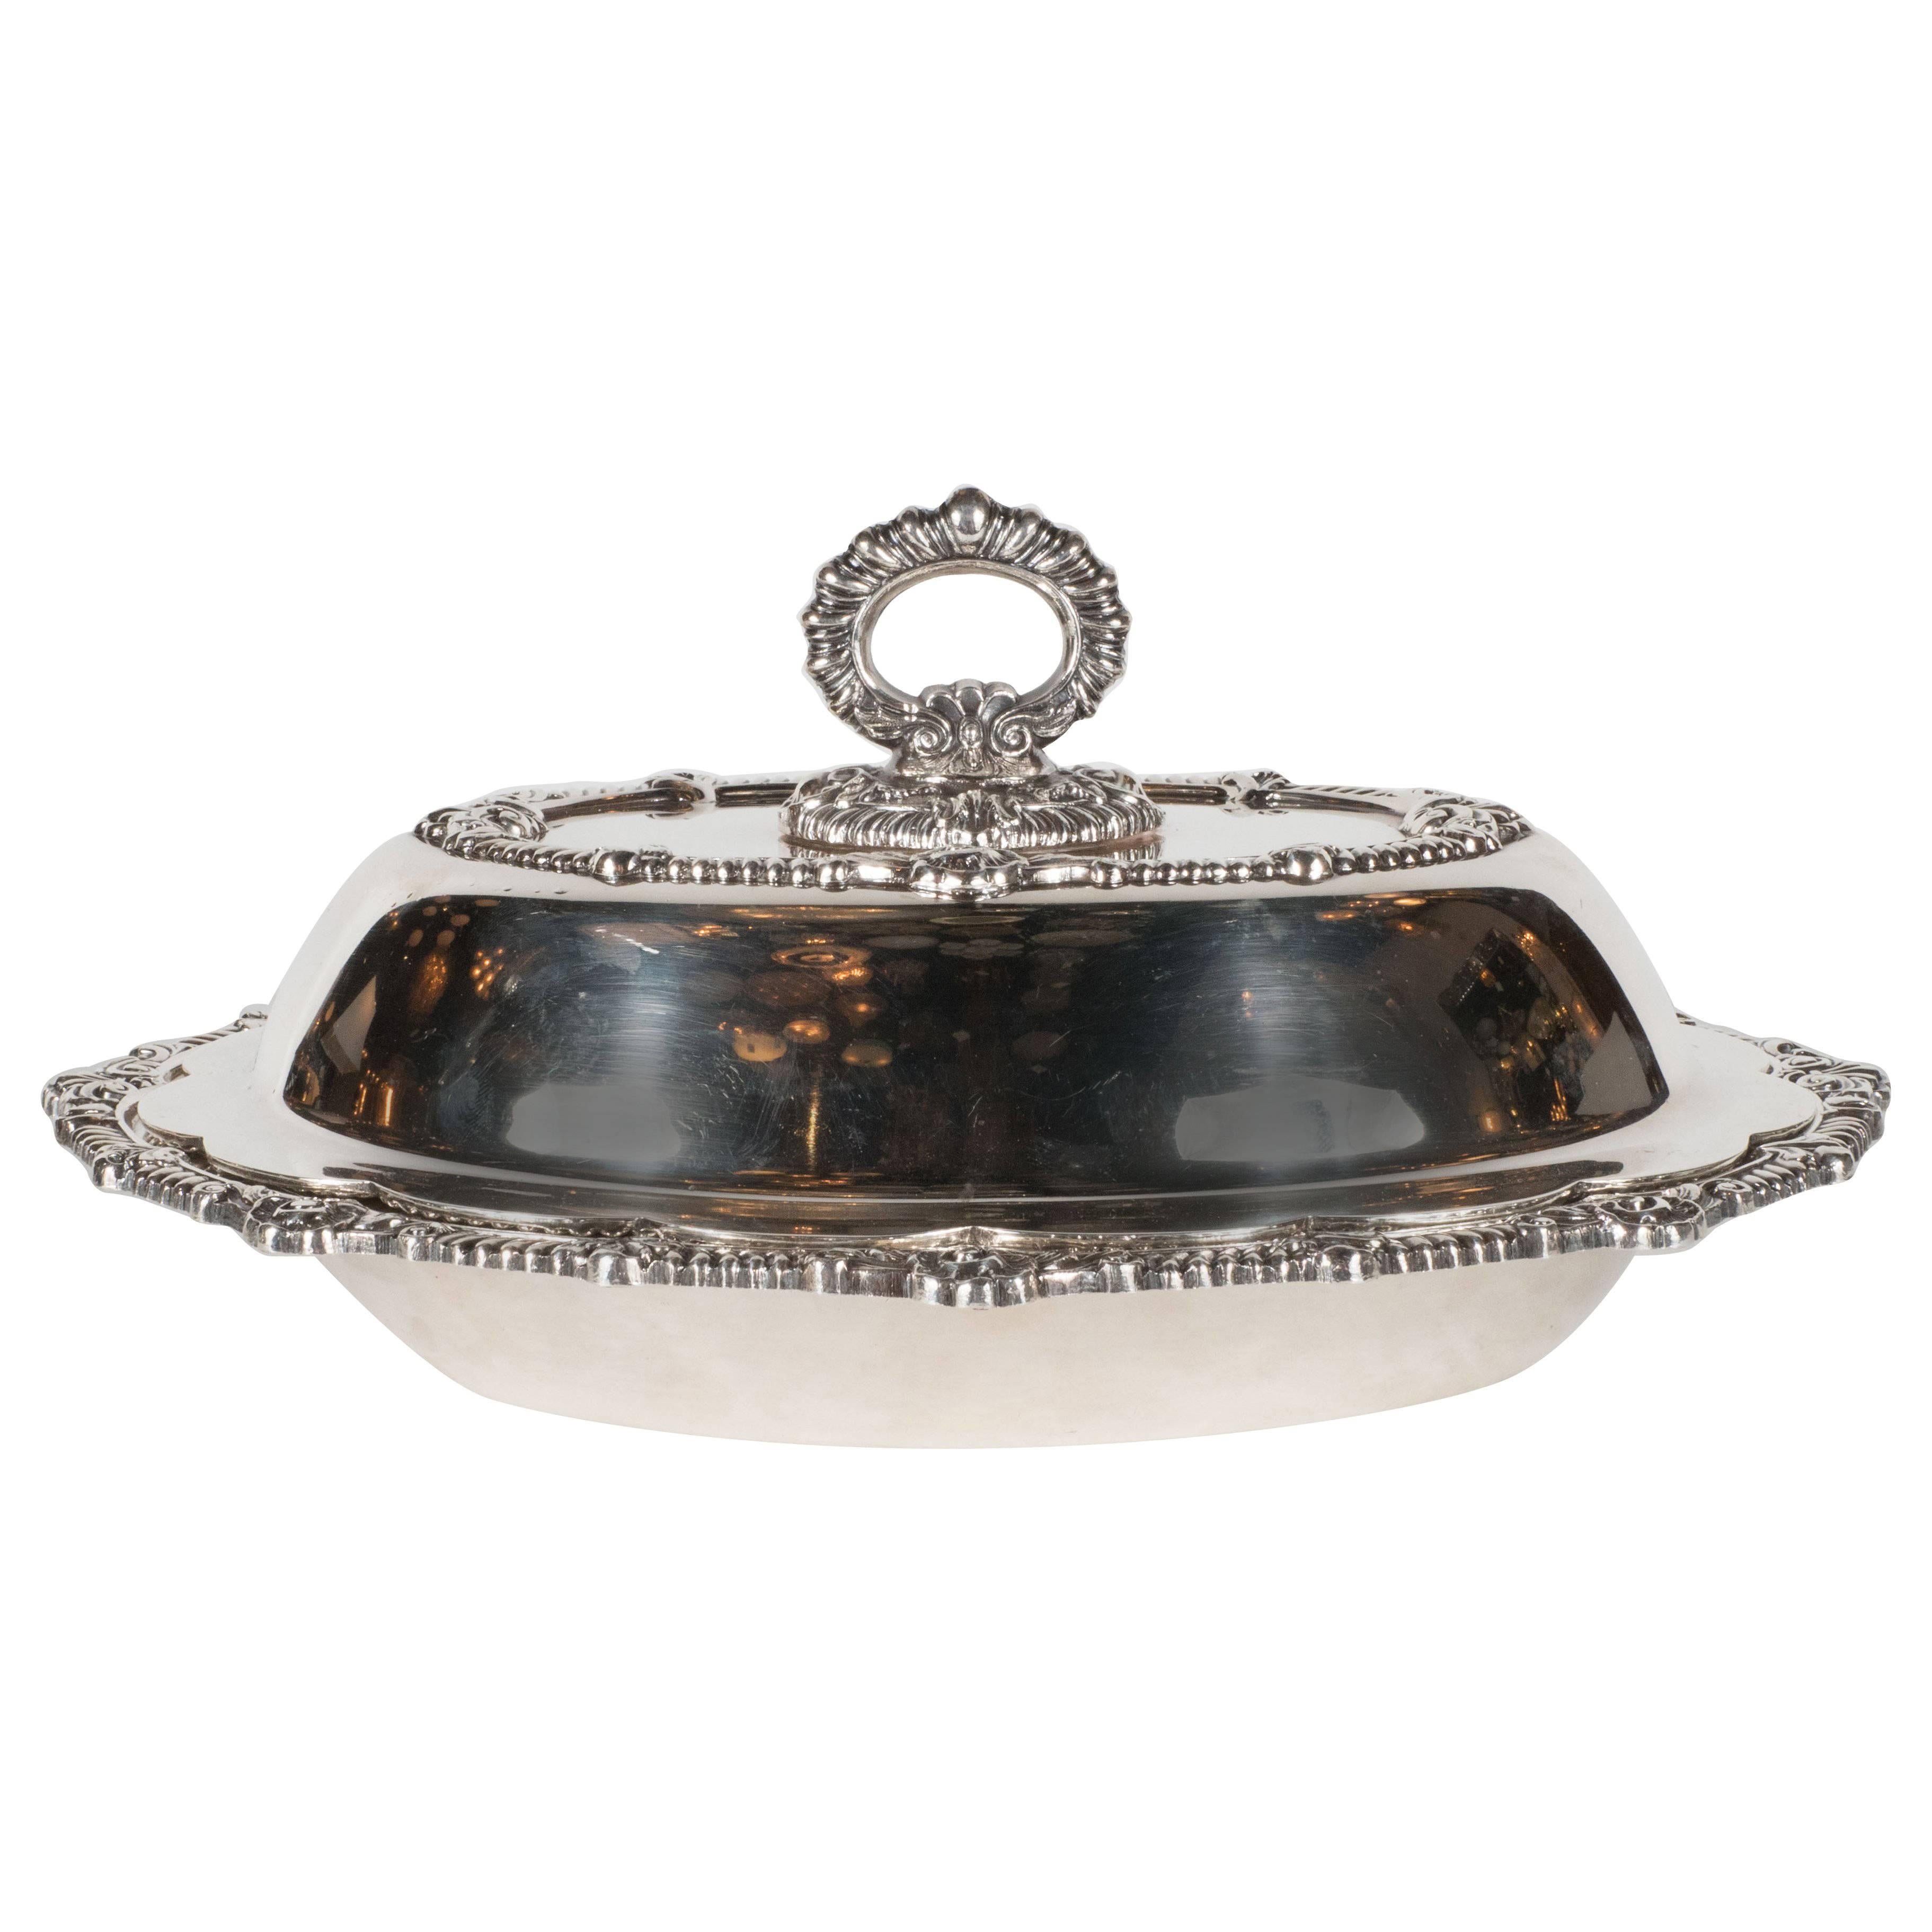 Neocolonialist Revival Silver Plated Tureen W/ Scalloped Edges & Baroque Detail For Sale